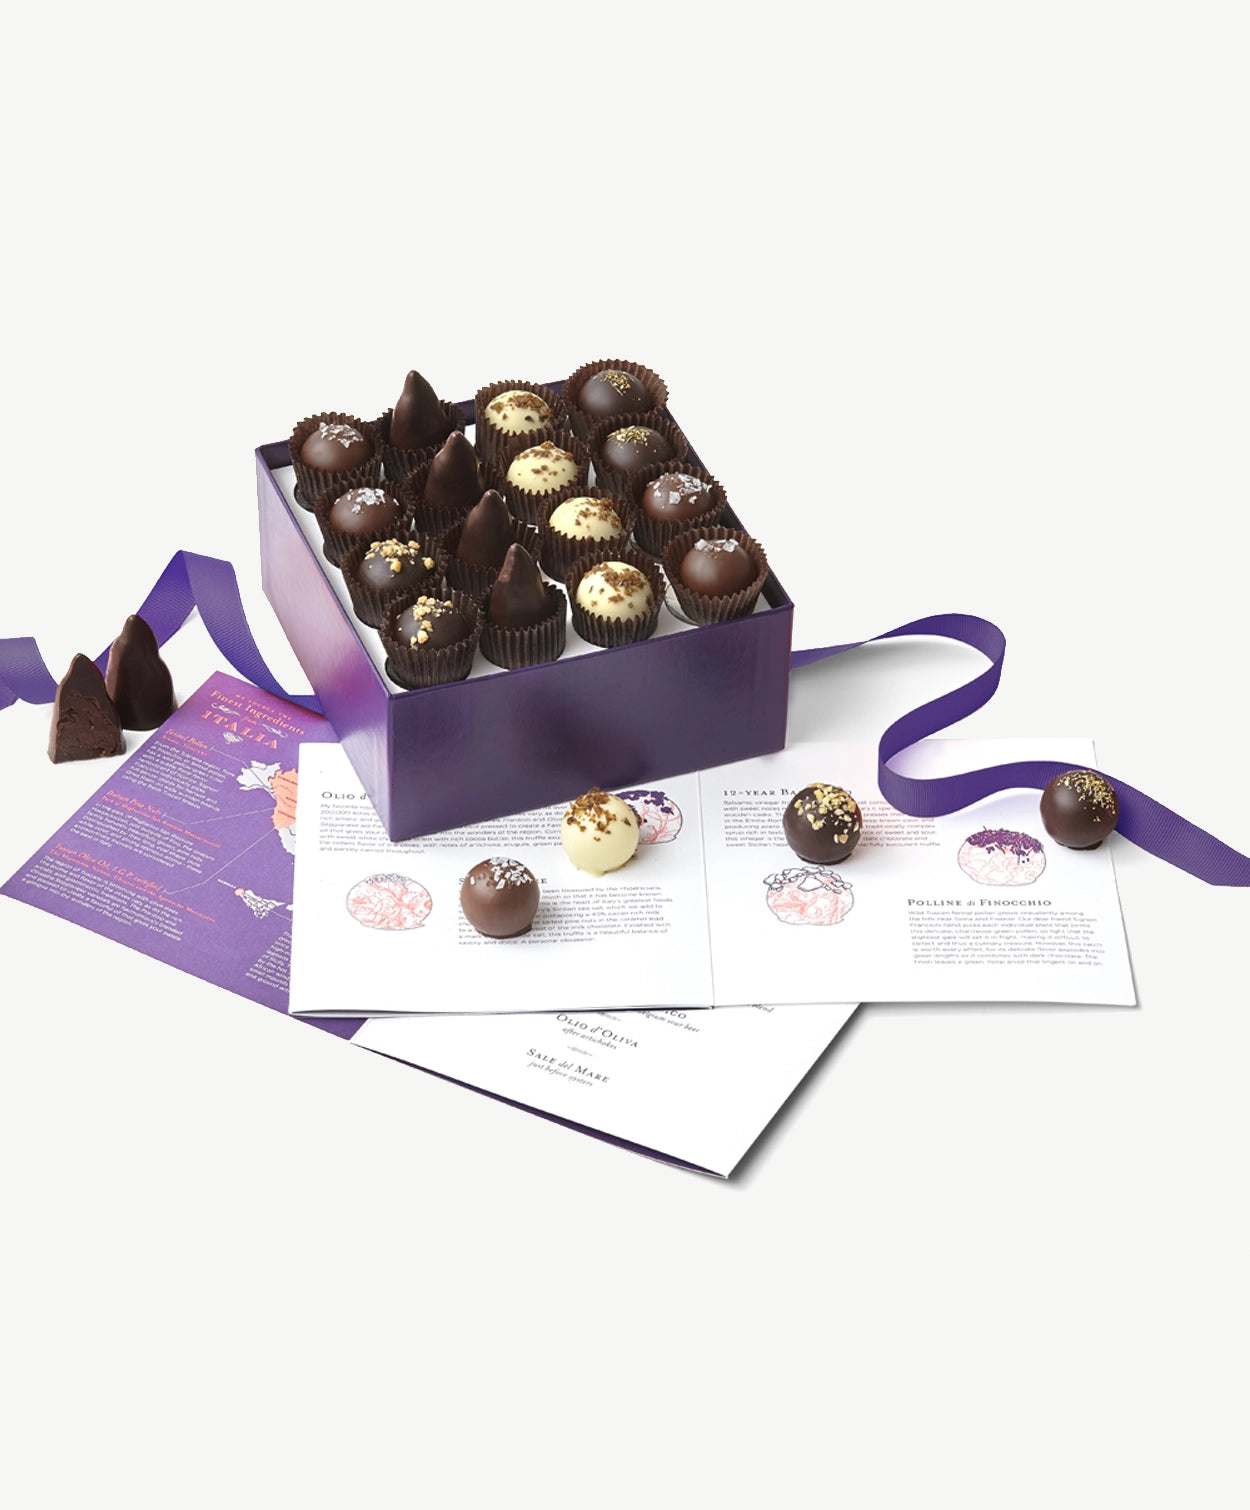 Purple candy box sits open displaying a Voges Italian Truffle collection with sixteen dark, milk and white chocolate bonbons beside several truffles and included tasting guide book on a white background.  